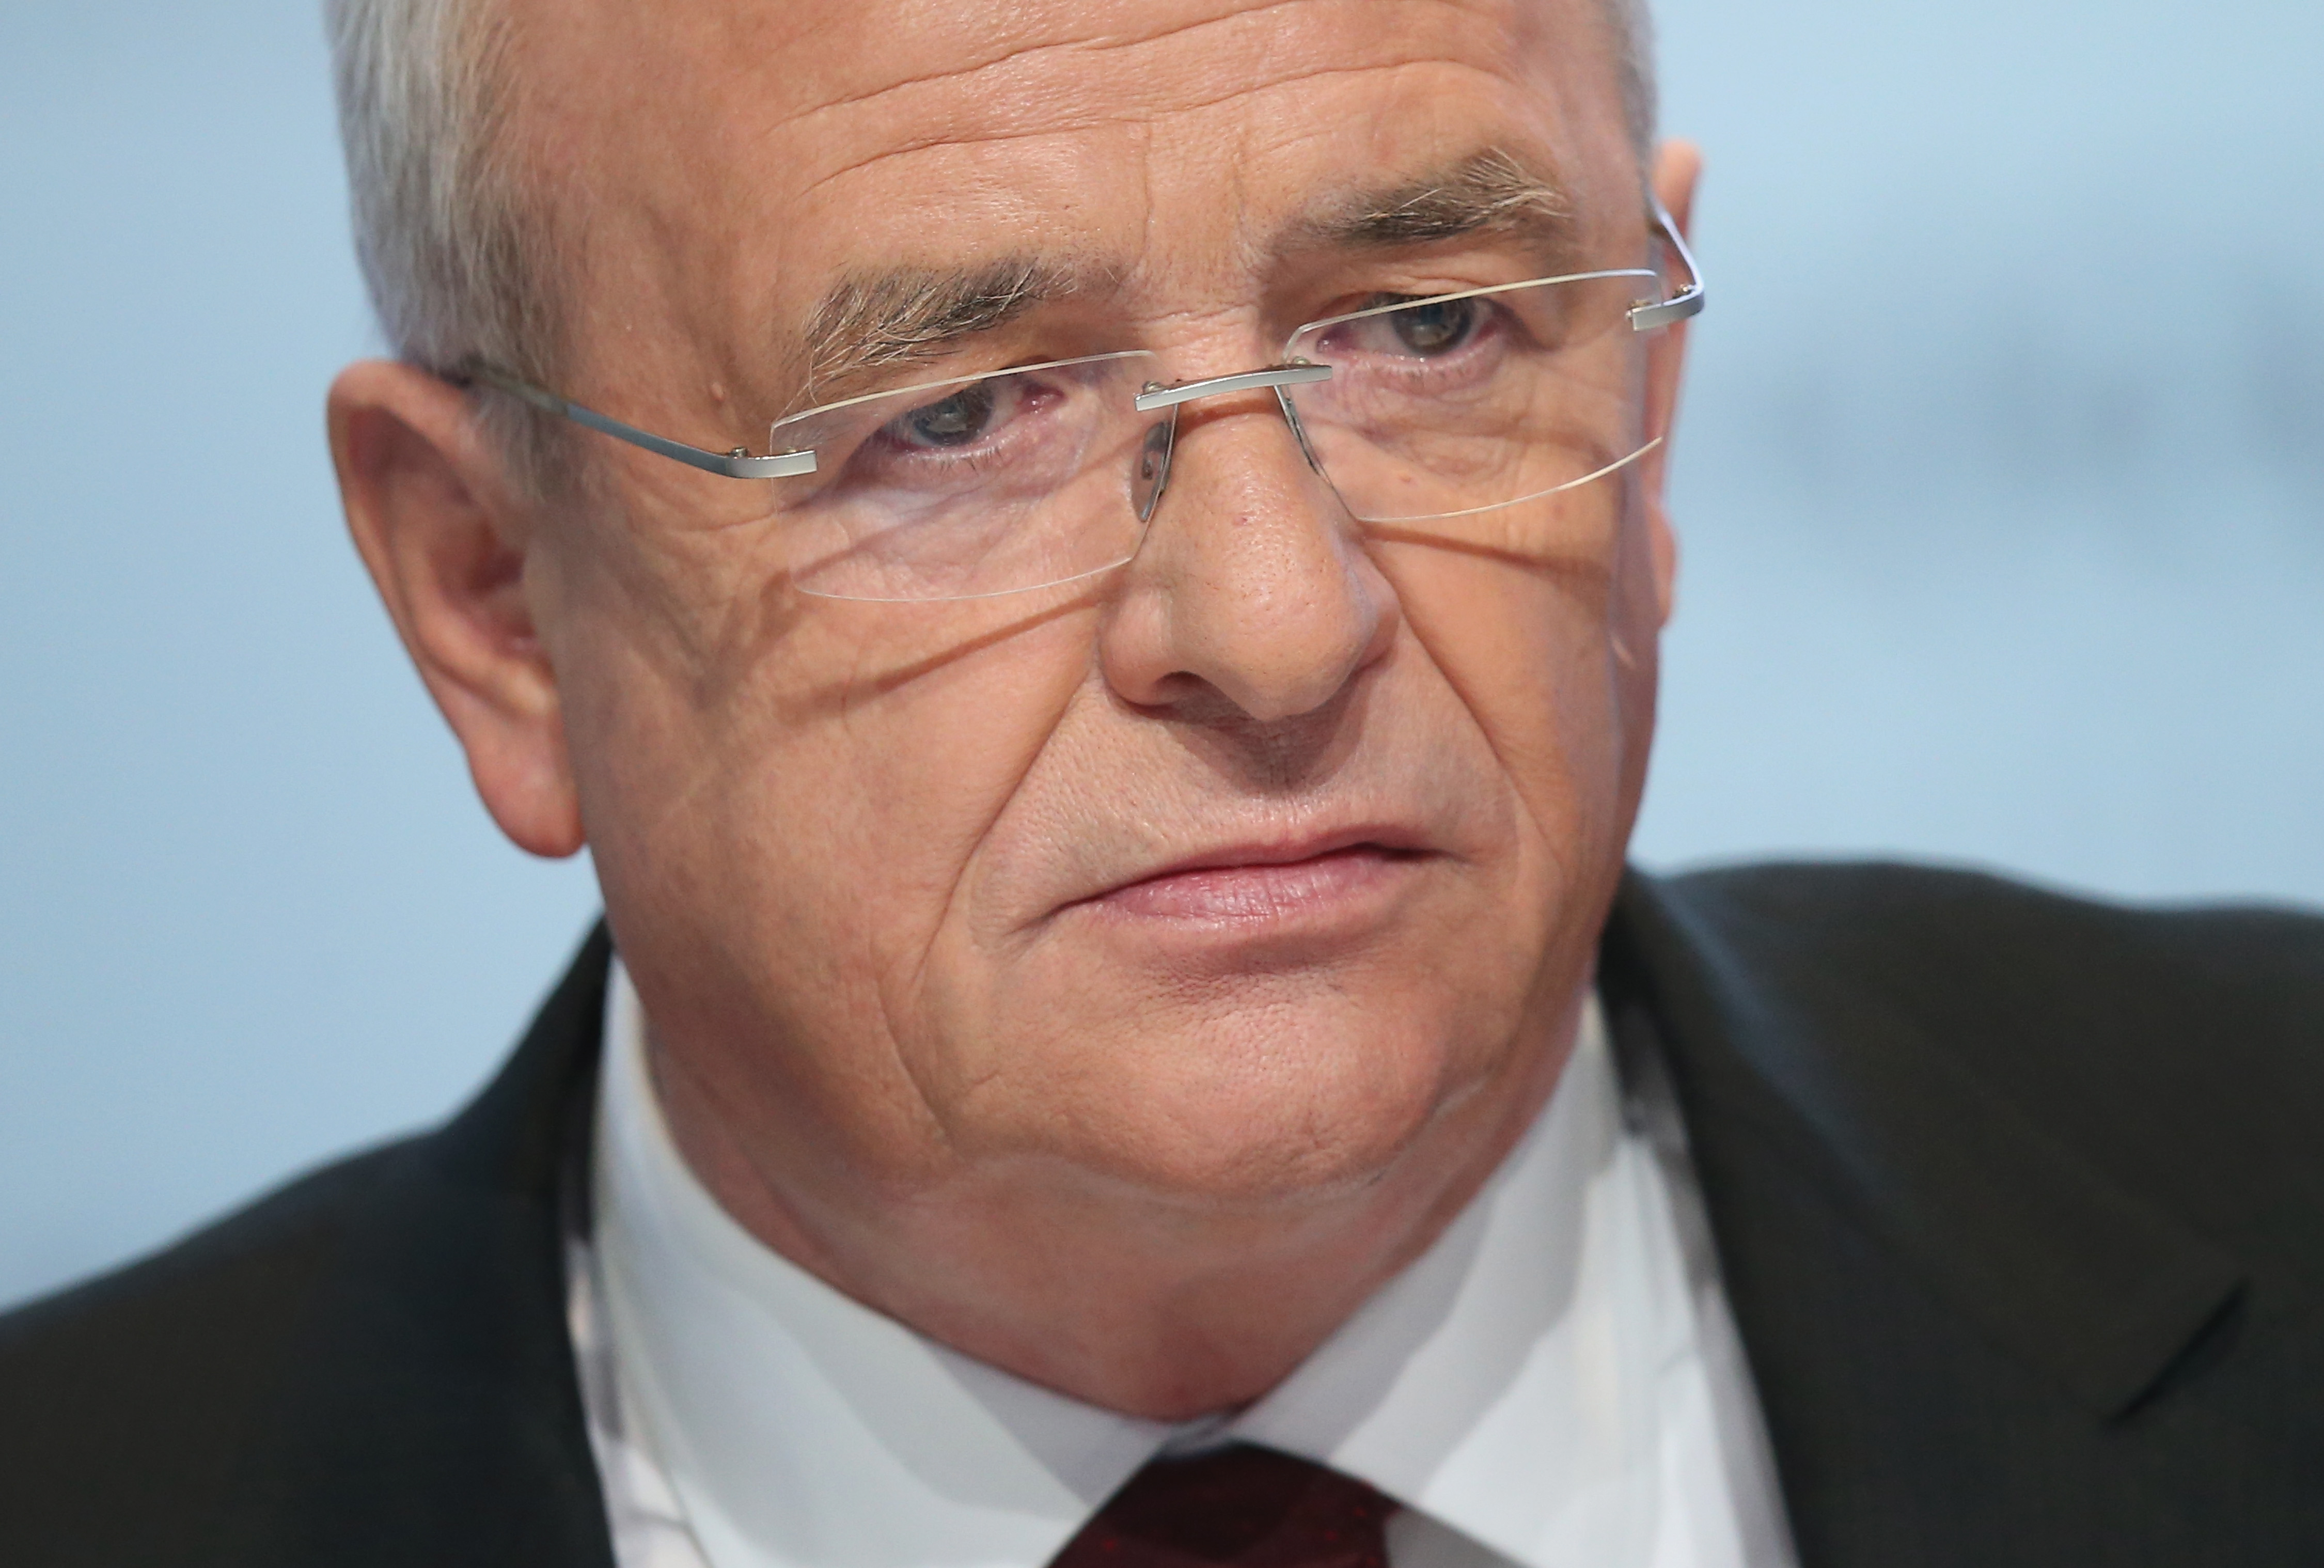 Volkswagen CEO Martin Winterkorn attends the company's annual press conference on March 13, 2014 in Wolfsburg, Germany (Sean Gallup—Getty Images)